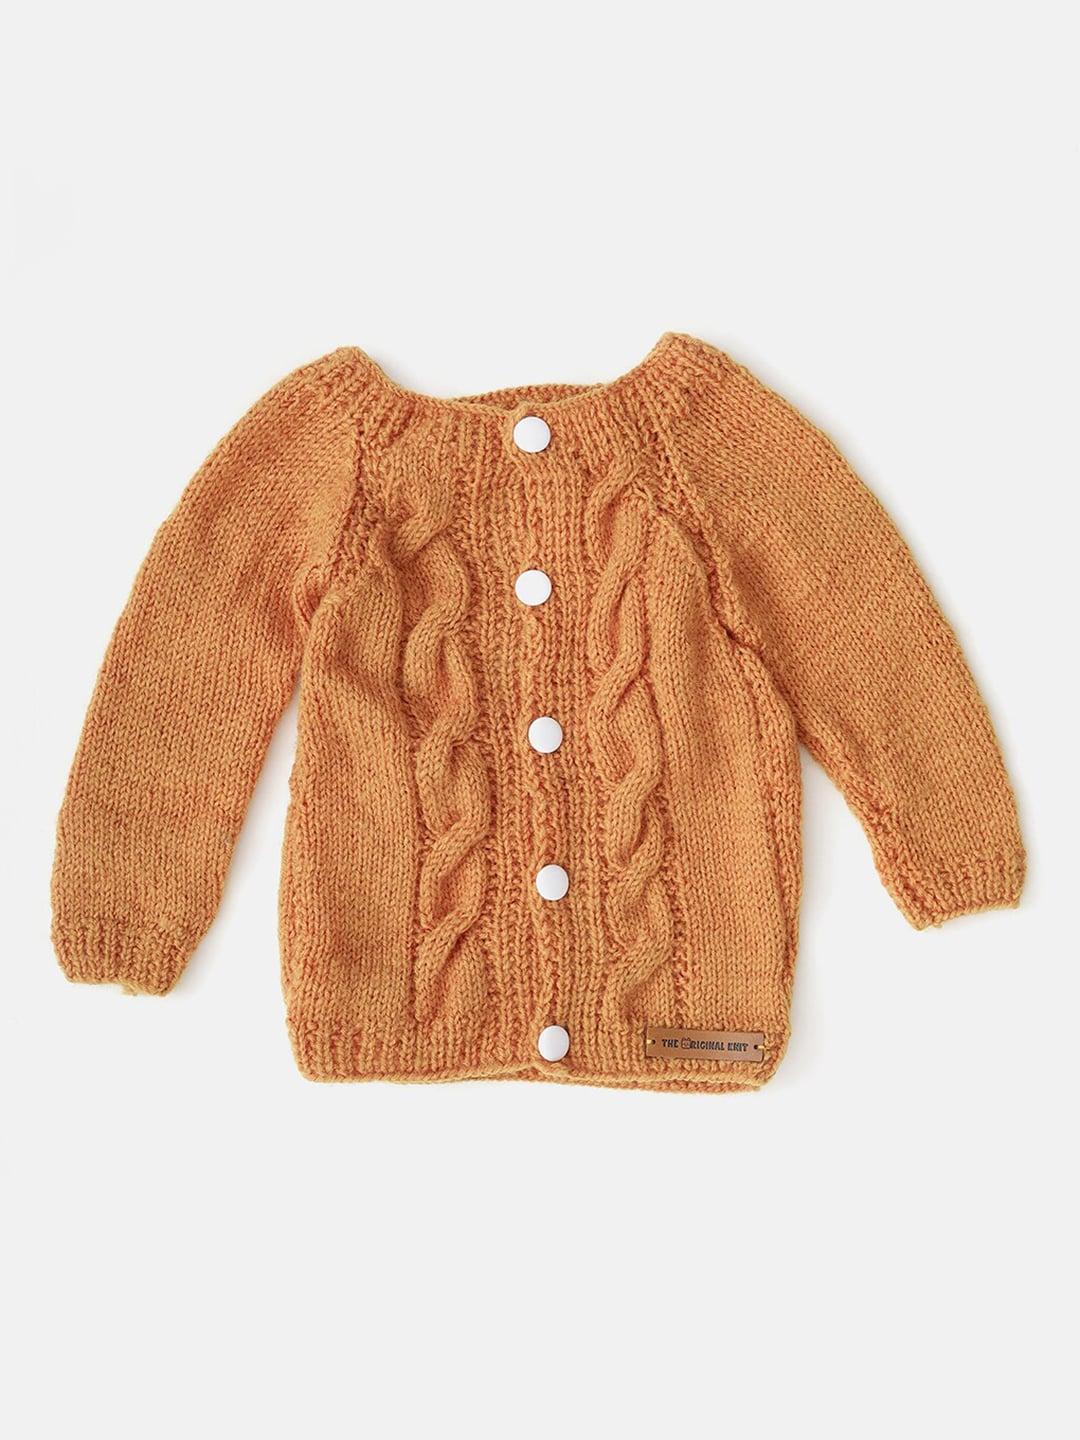 the-original-knit-infants-self-design-round-neck-button-detail-cardigan-sweaters